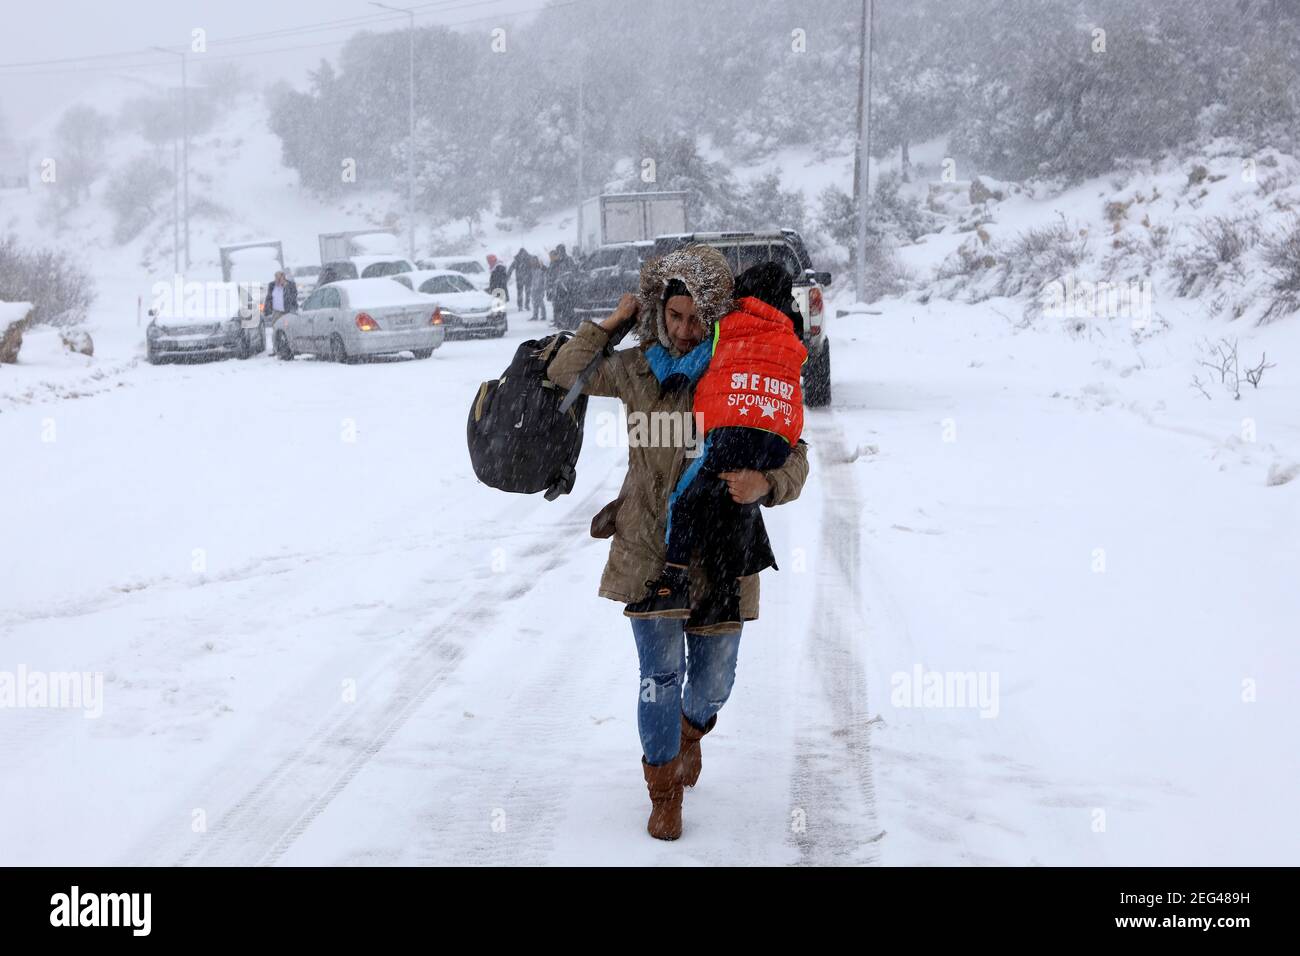 Ajloun, Jordan. 17th Feb, 2021. A woman carrying her child walks in snow in Ajloun, Jordan, on Feb. 17, 2021. A snowstorm on Wednesday hit Jordan's mountainous areas accompanied by heavy winds and cold weather. Credit: Mohammad Abu Ghosh/Xinhua/Alamy Live News Stock Photo